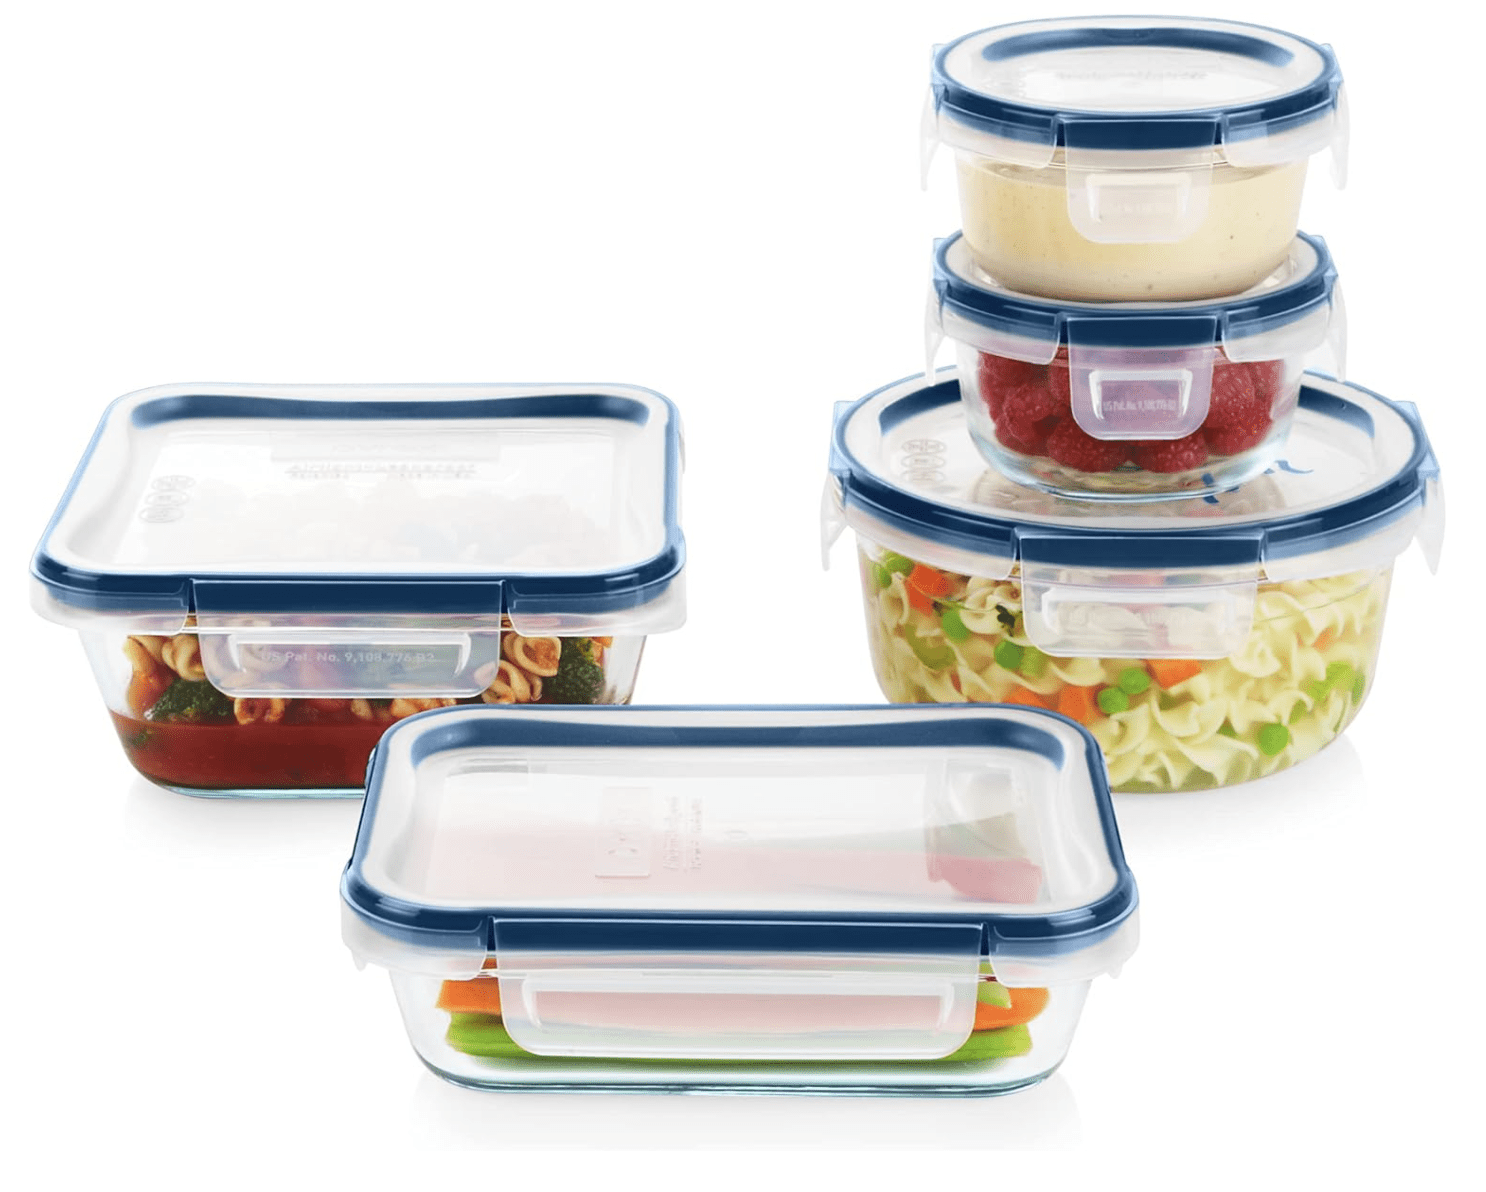 http://cdn.apartmenttherapy.info/image/upload/v1696265161/commerce/Amazon-Pyrex-Freshlock-Food-Storage-Container.png